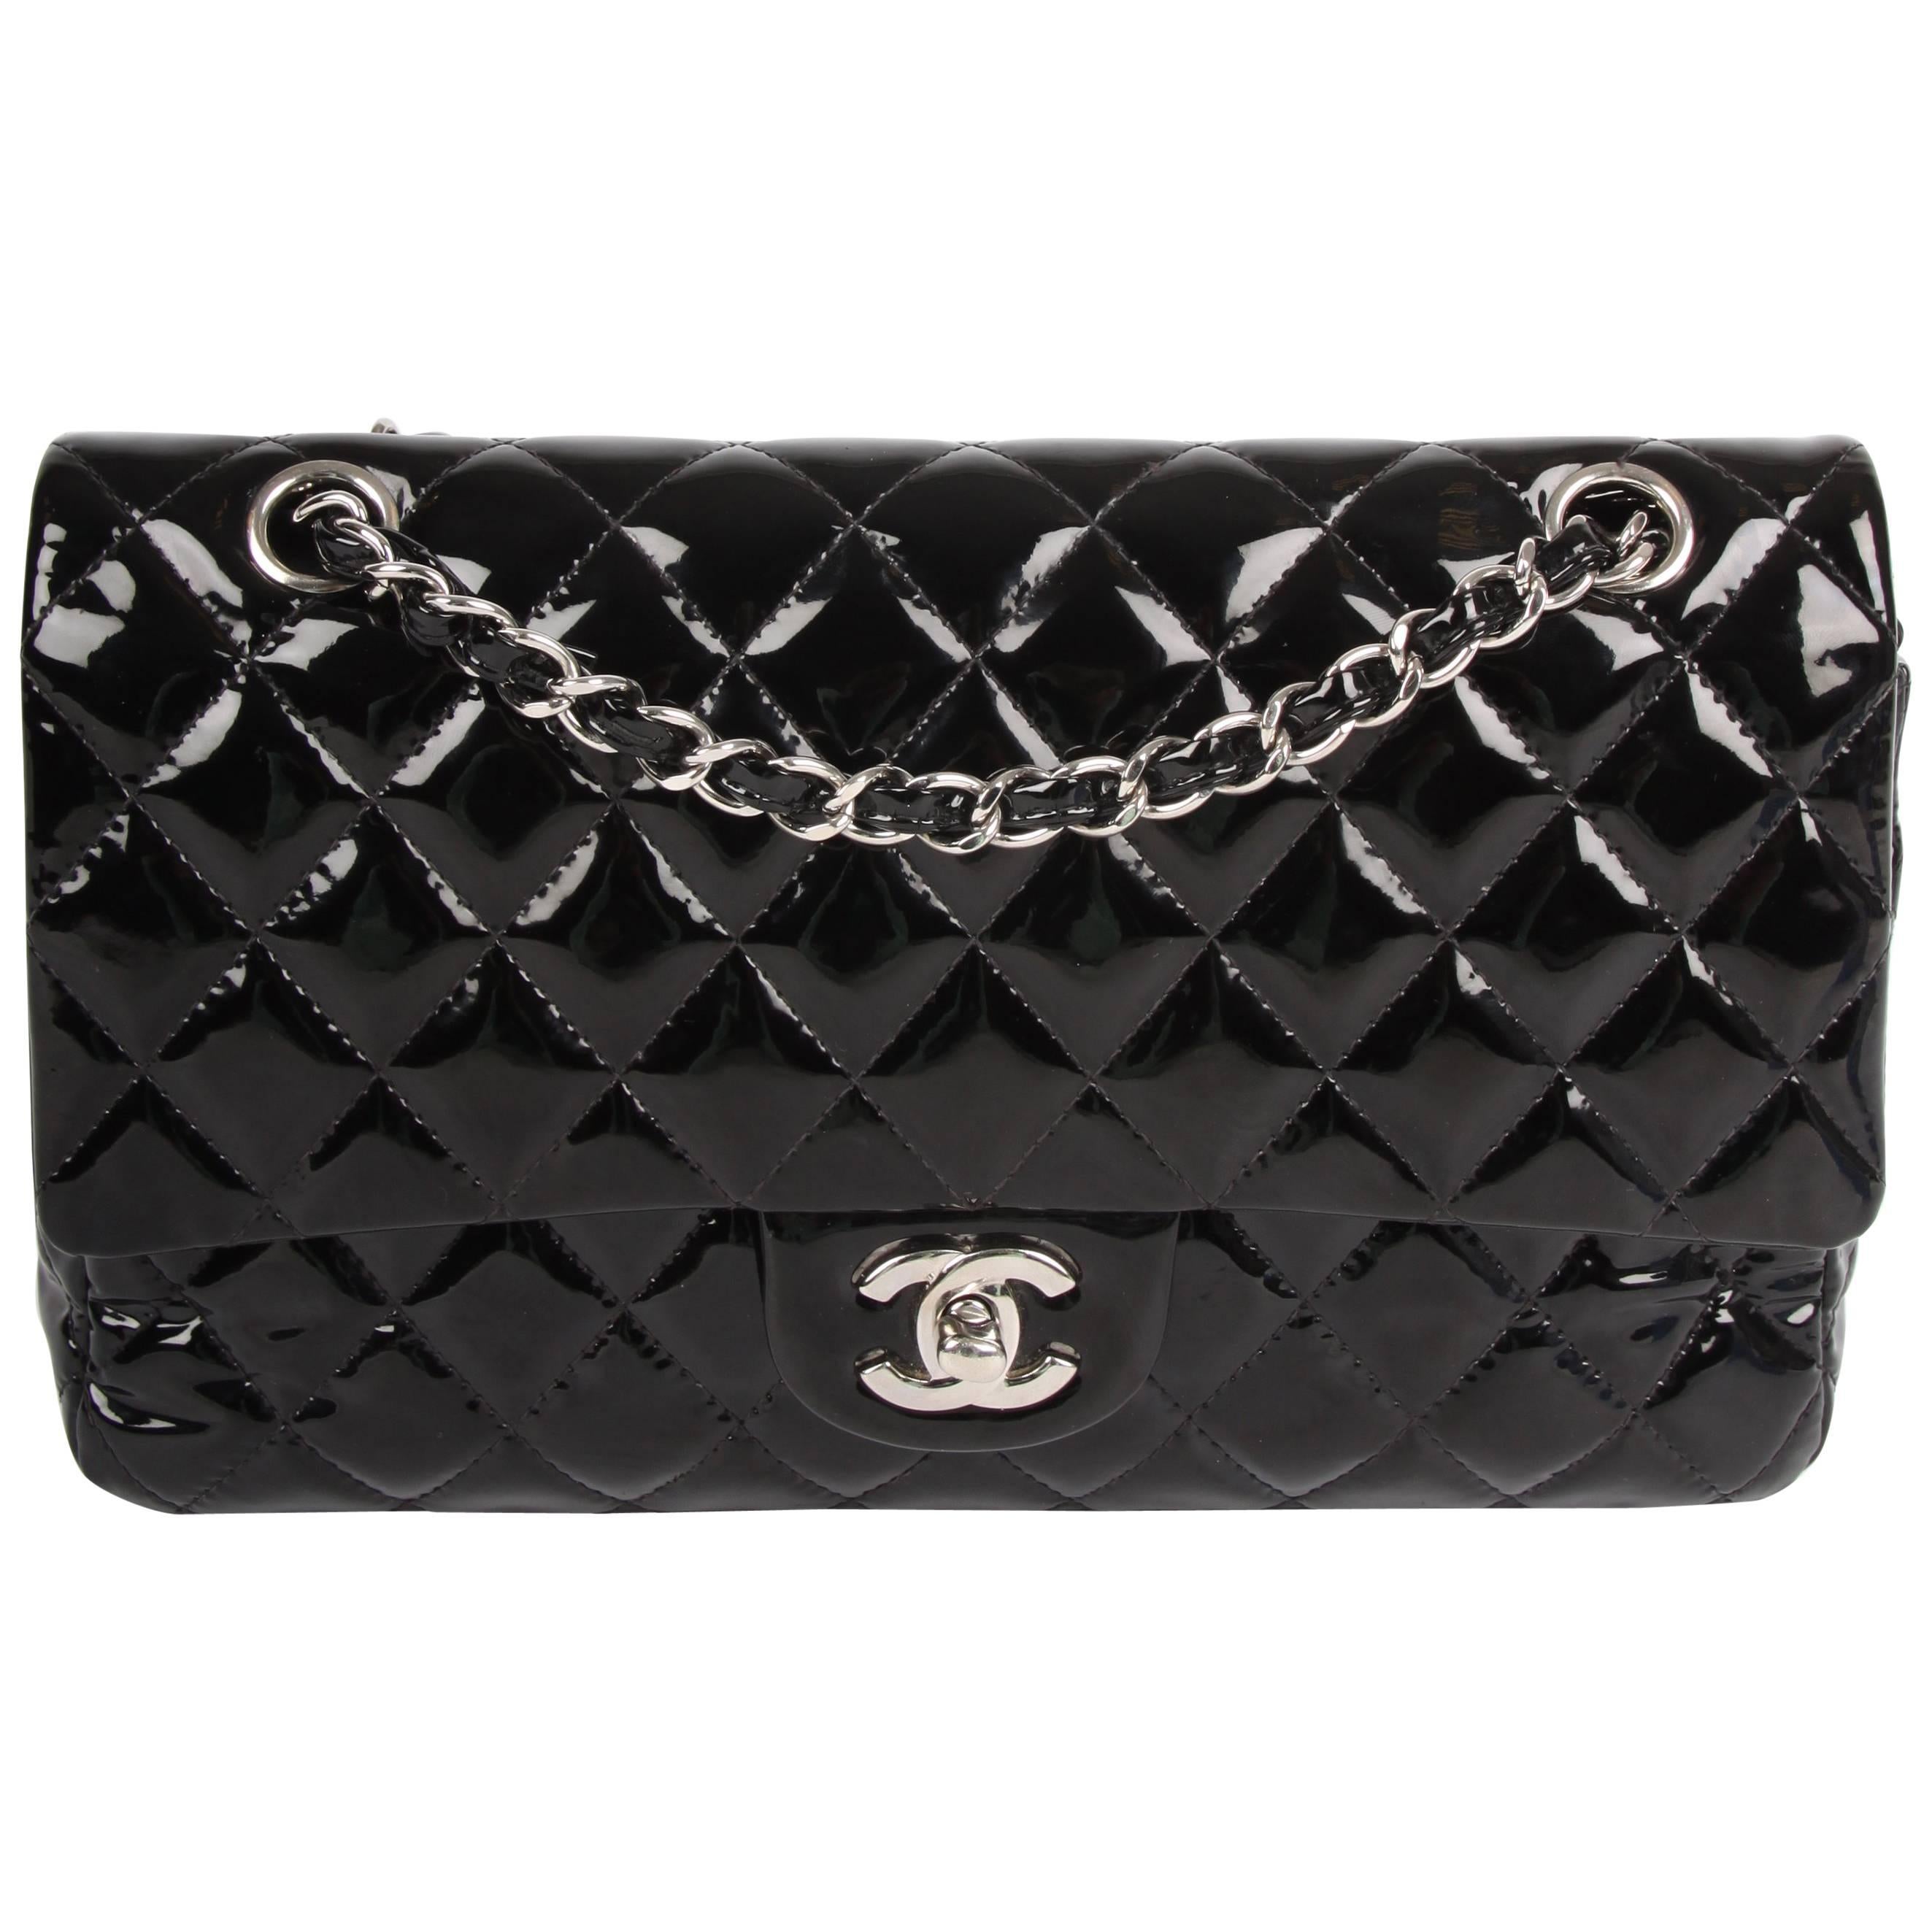 Chanel 2.55 Timeless Medium Double Flap Bag Patent Leather - black For Sale